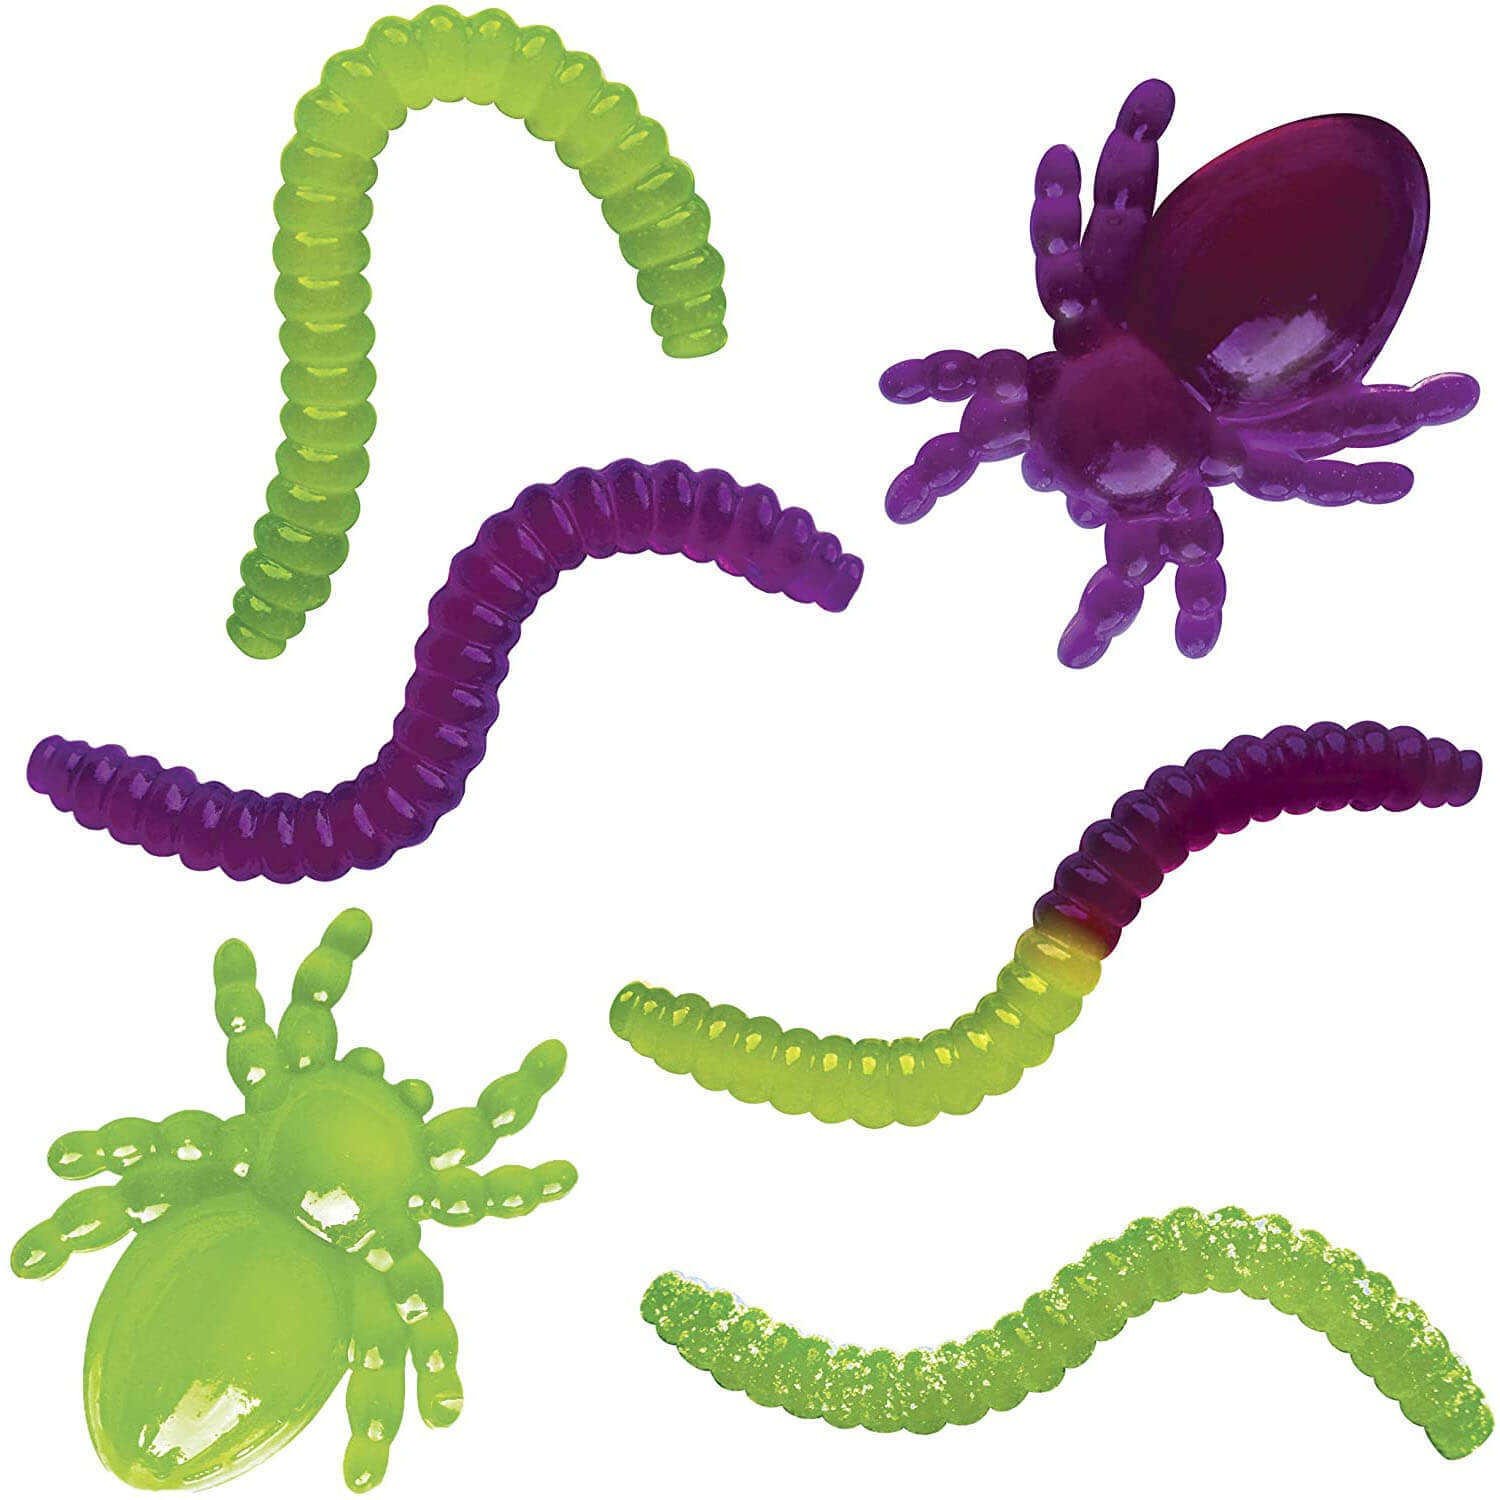 Thames and Kosmos Gross Gummy Candy Lab: Worms and Spiders